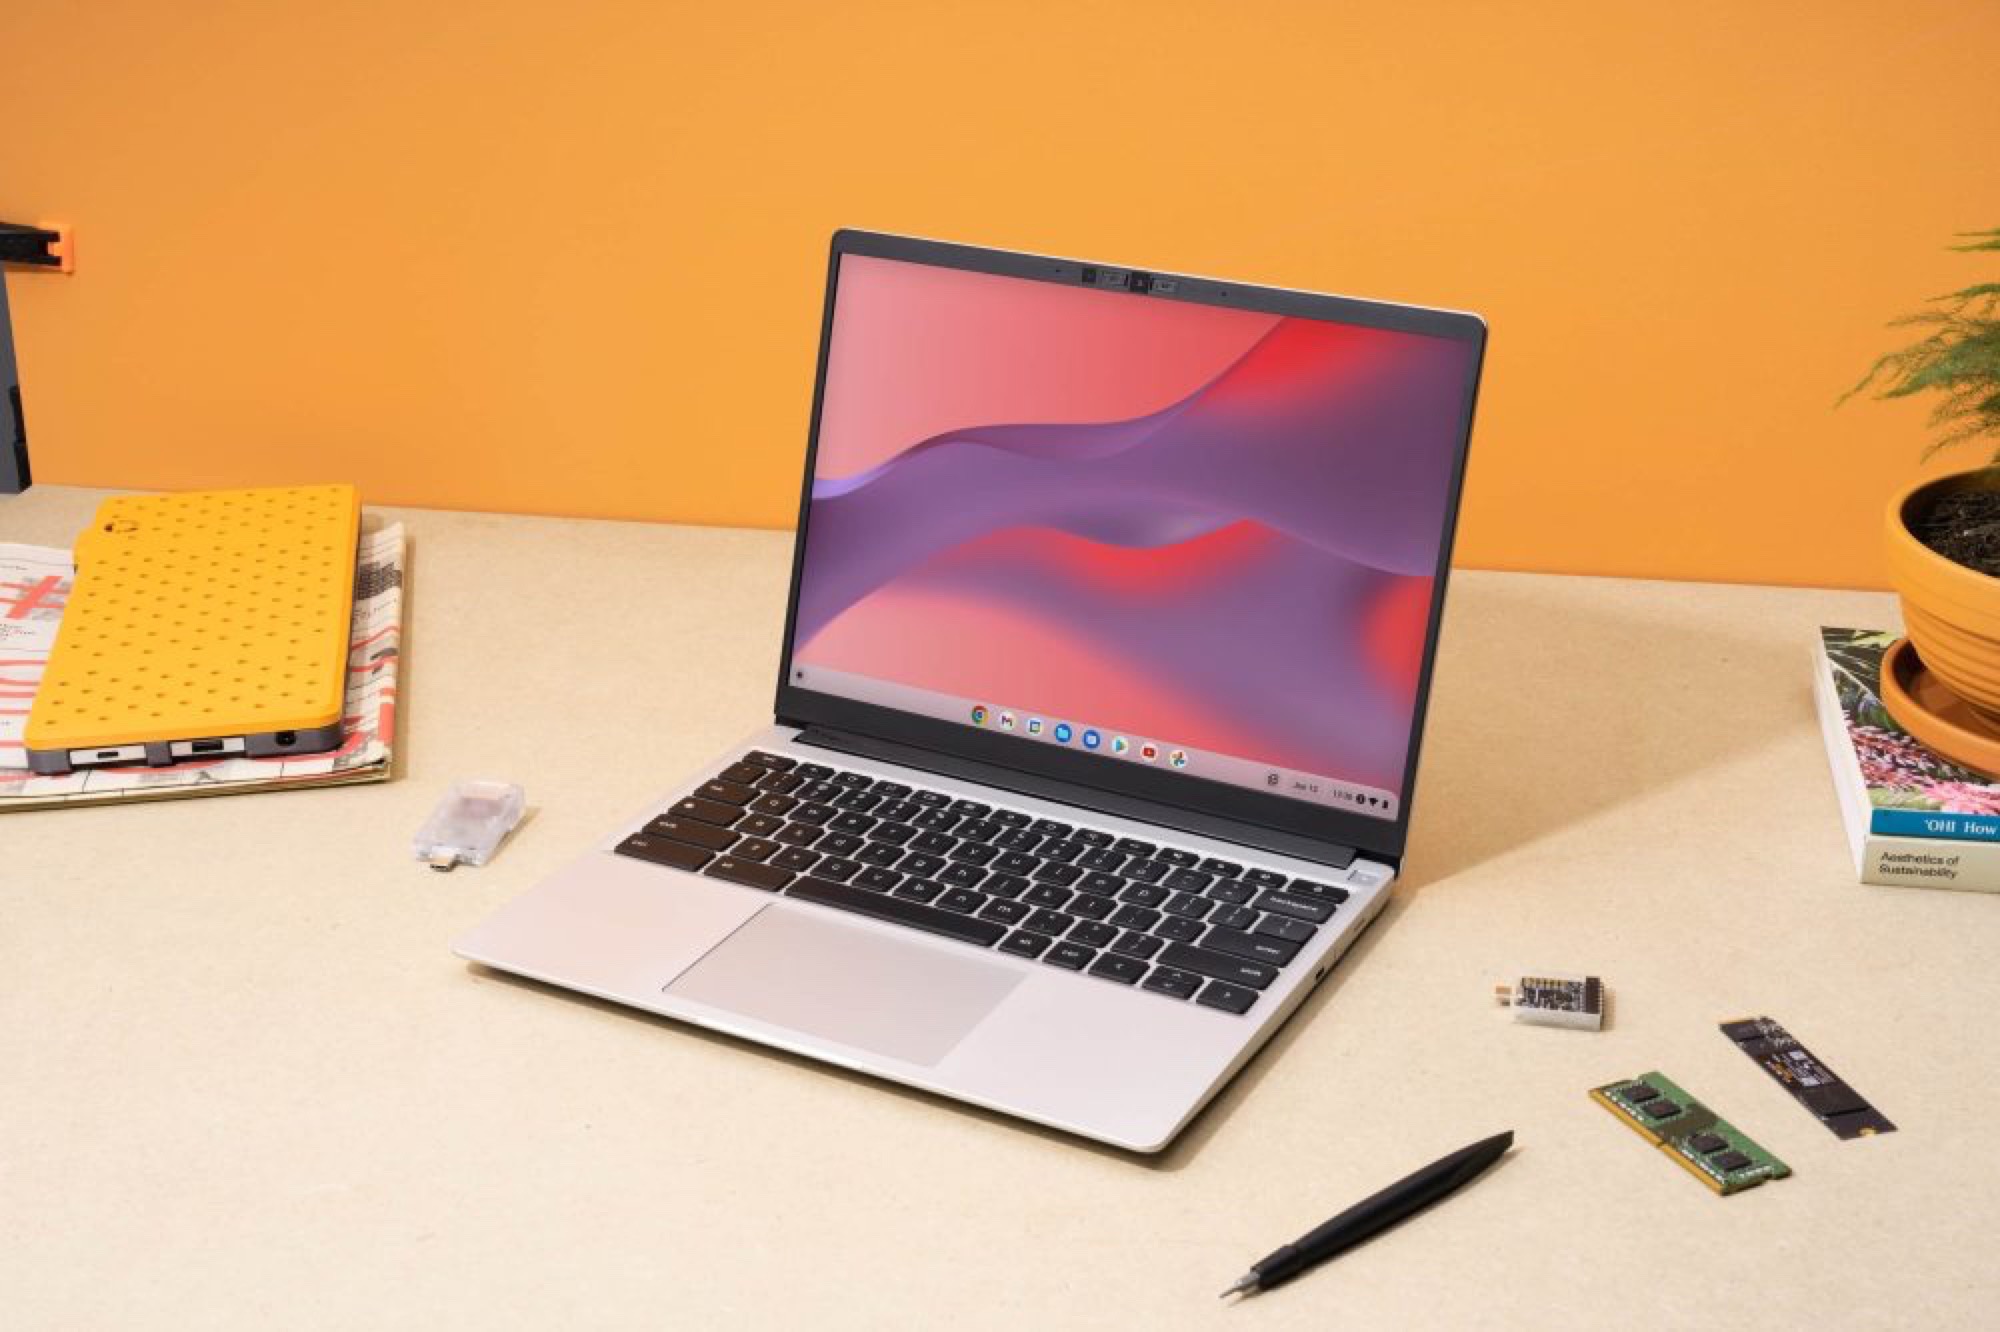 Framework laptop starts as a cheaper Chromebook version with many repair features